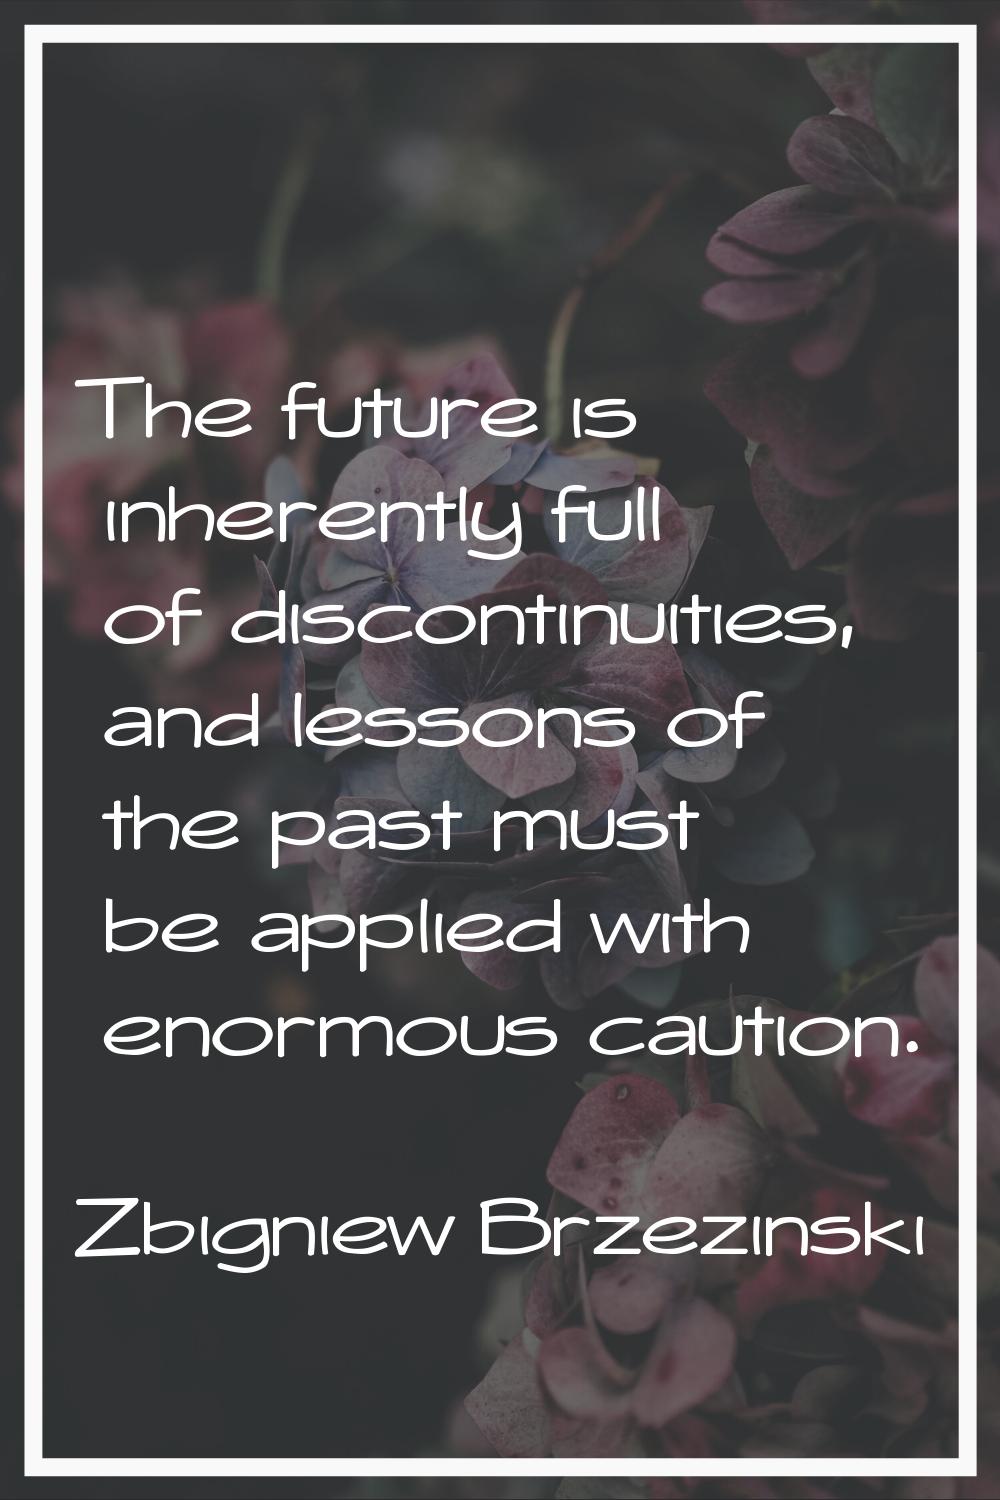 The future is inherently full of discontinuities, and lessons of the past must be applied with enor